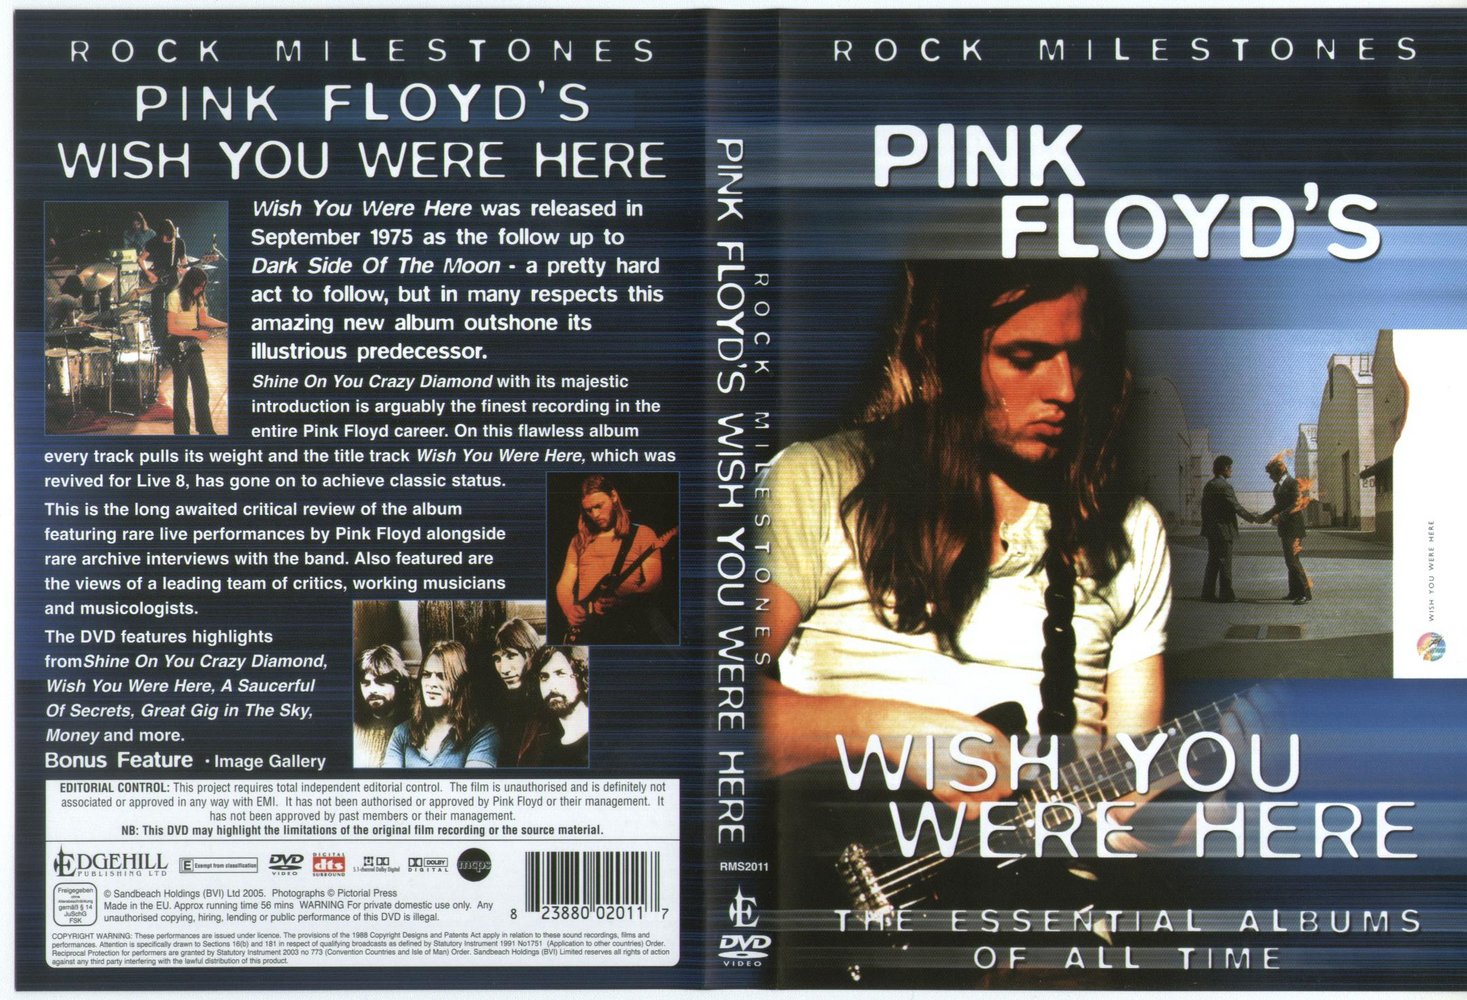 Jaquette DVD Pink Floyd Wish you were here